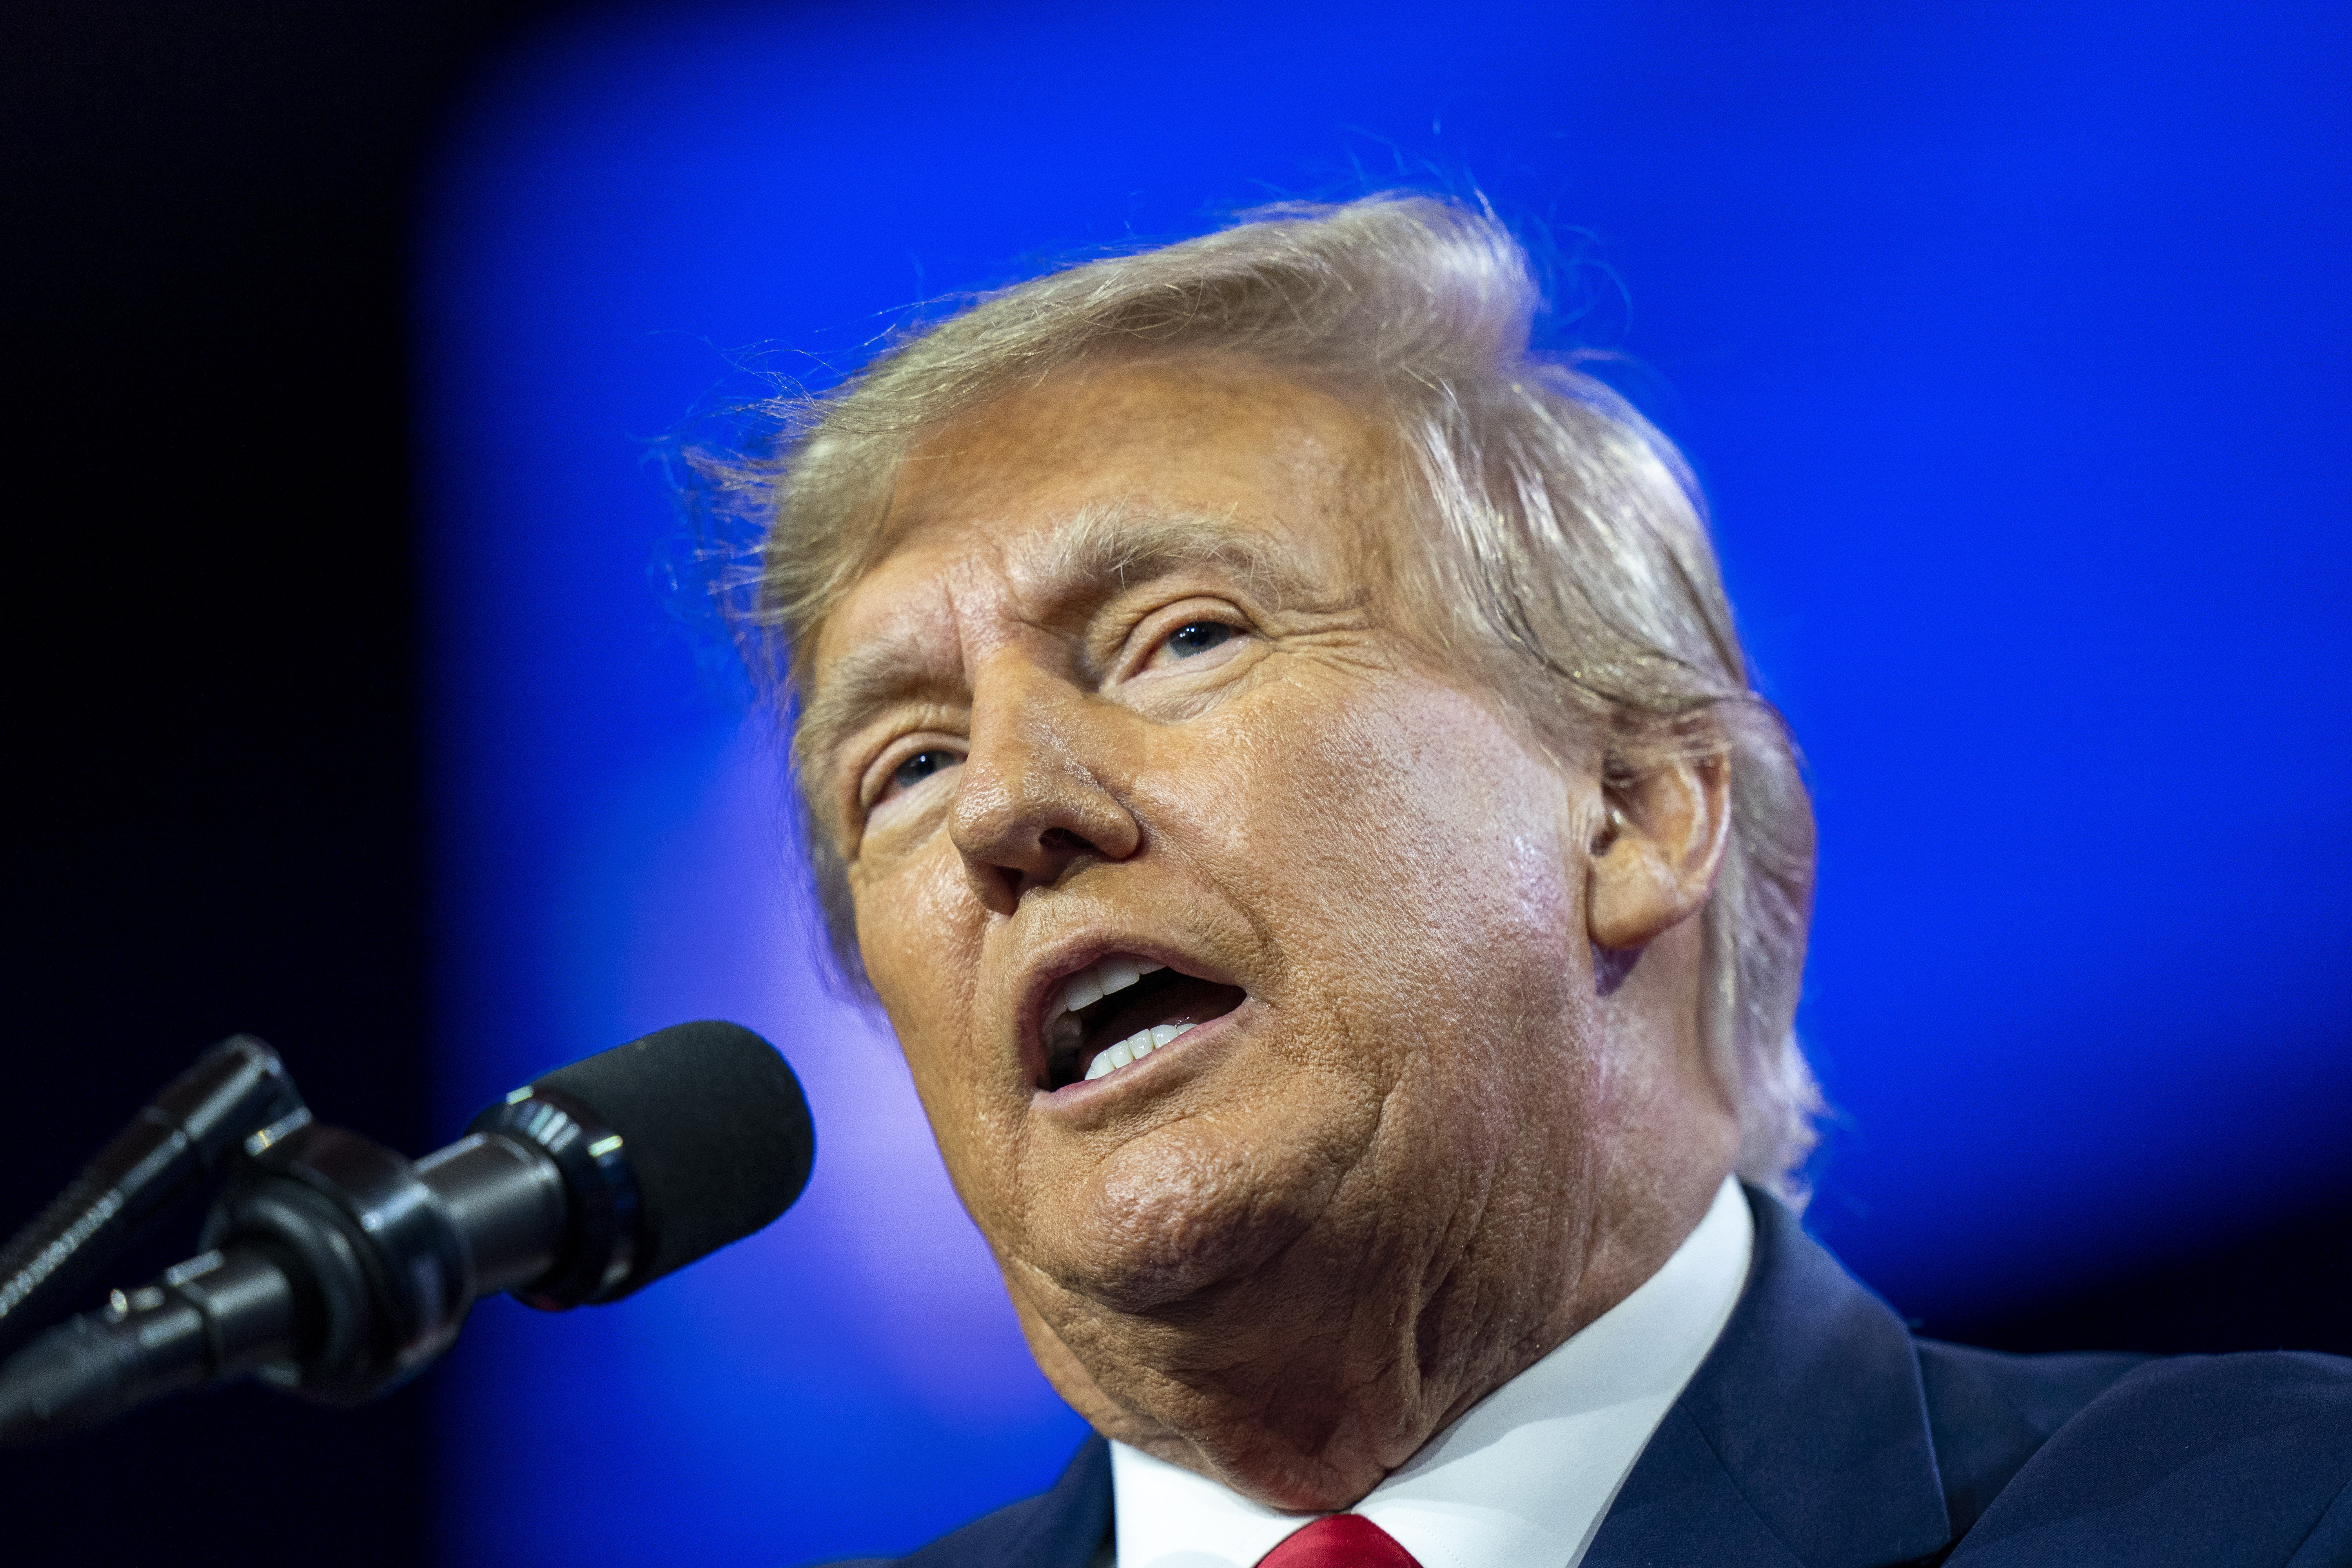 Former President Donald Trump speaks at the Conservative Political Action Conference, CPAC 2023, Saturday, March 4, 2023, at National Harbor in Oxon Hill, Md. (AP Photo/Alex Brandon)